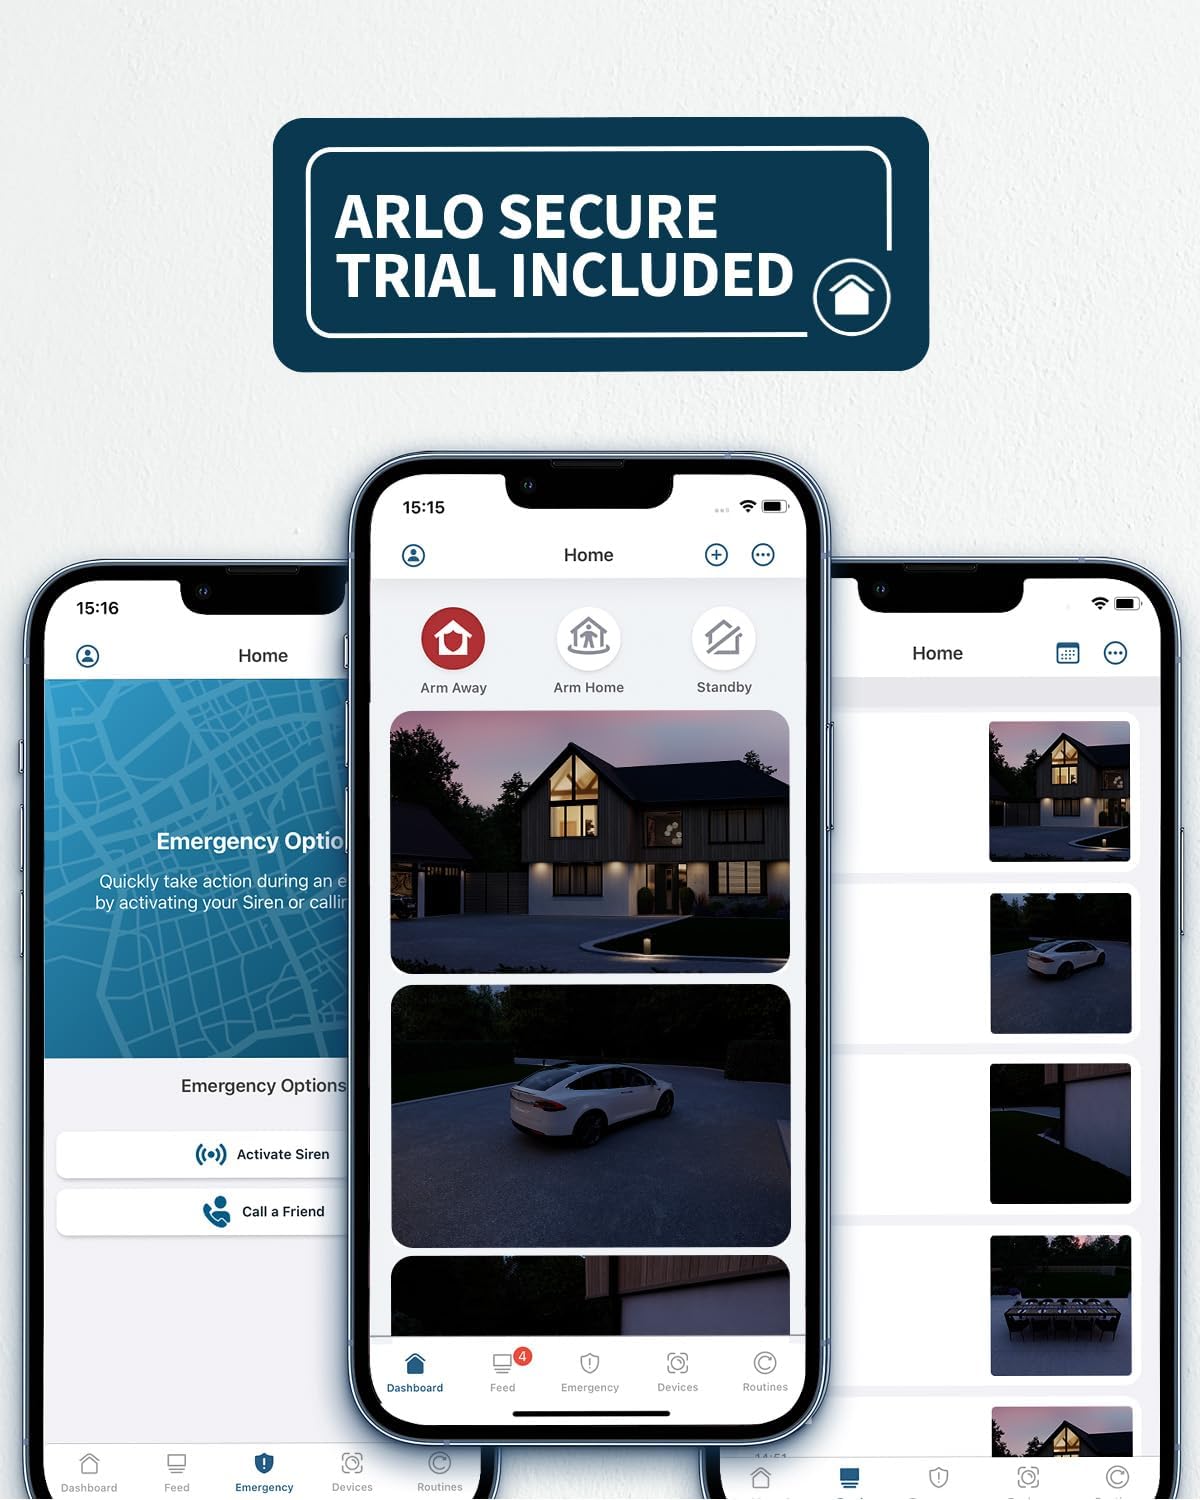 This image features three smartphones showcasing a security application interface; the app is likely for a home security system. The screens depict various functions: